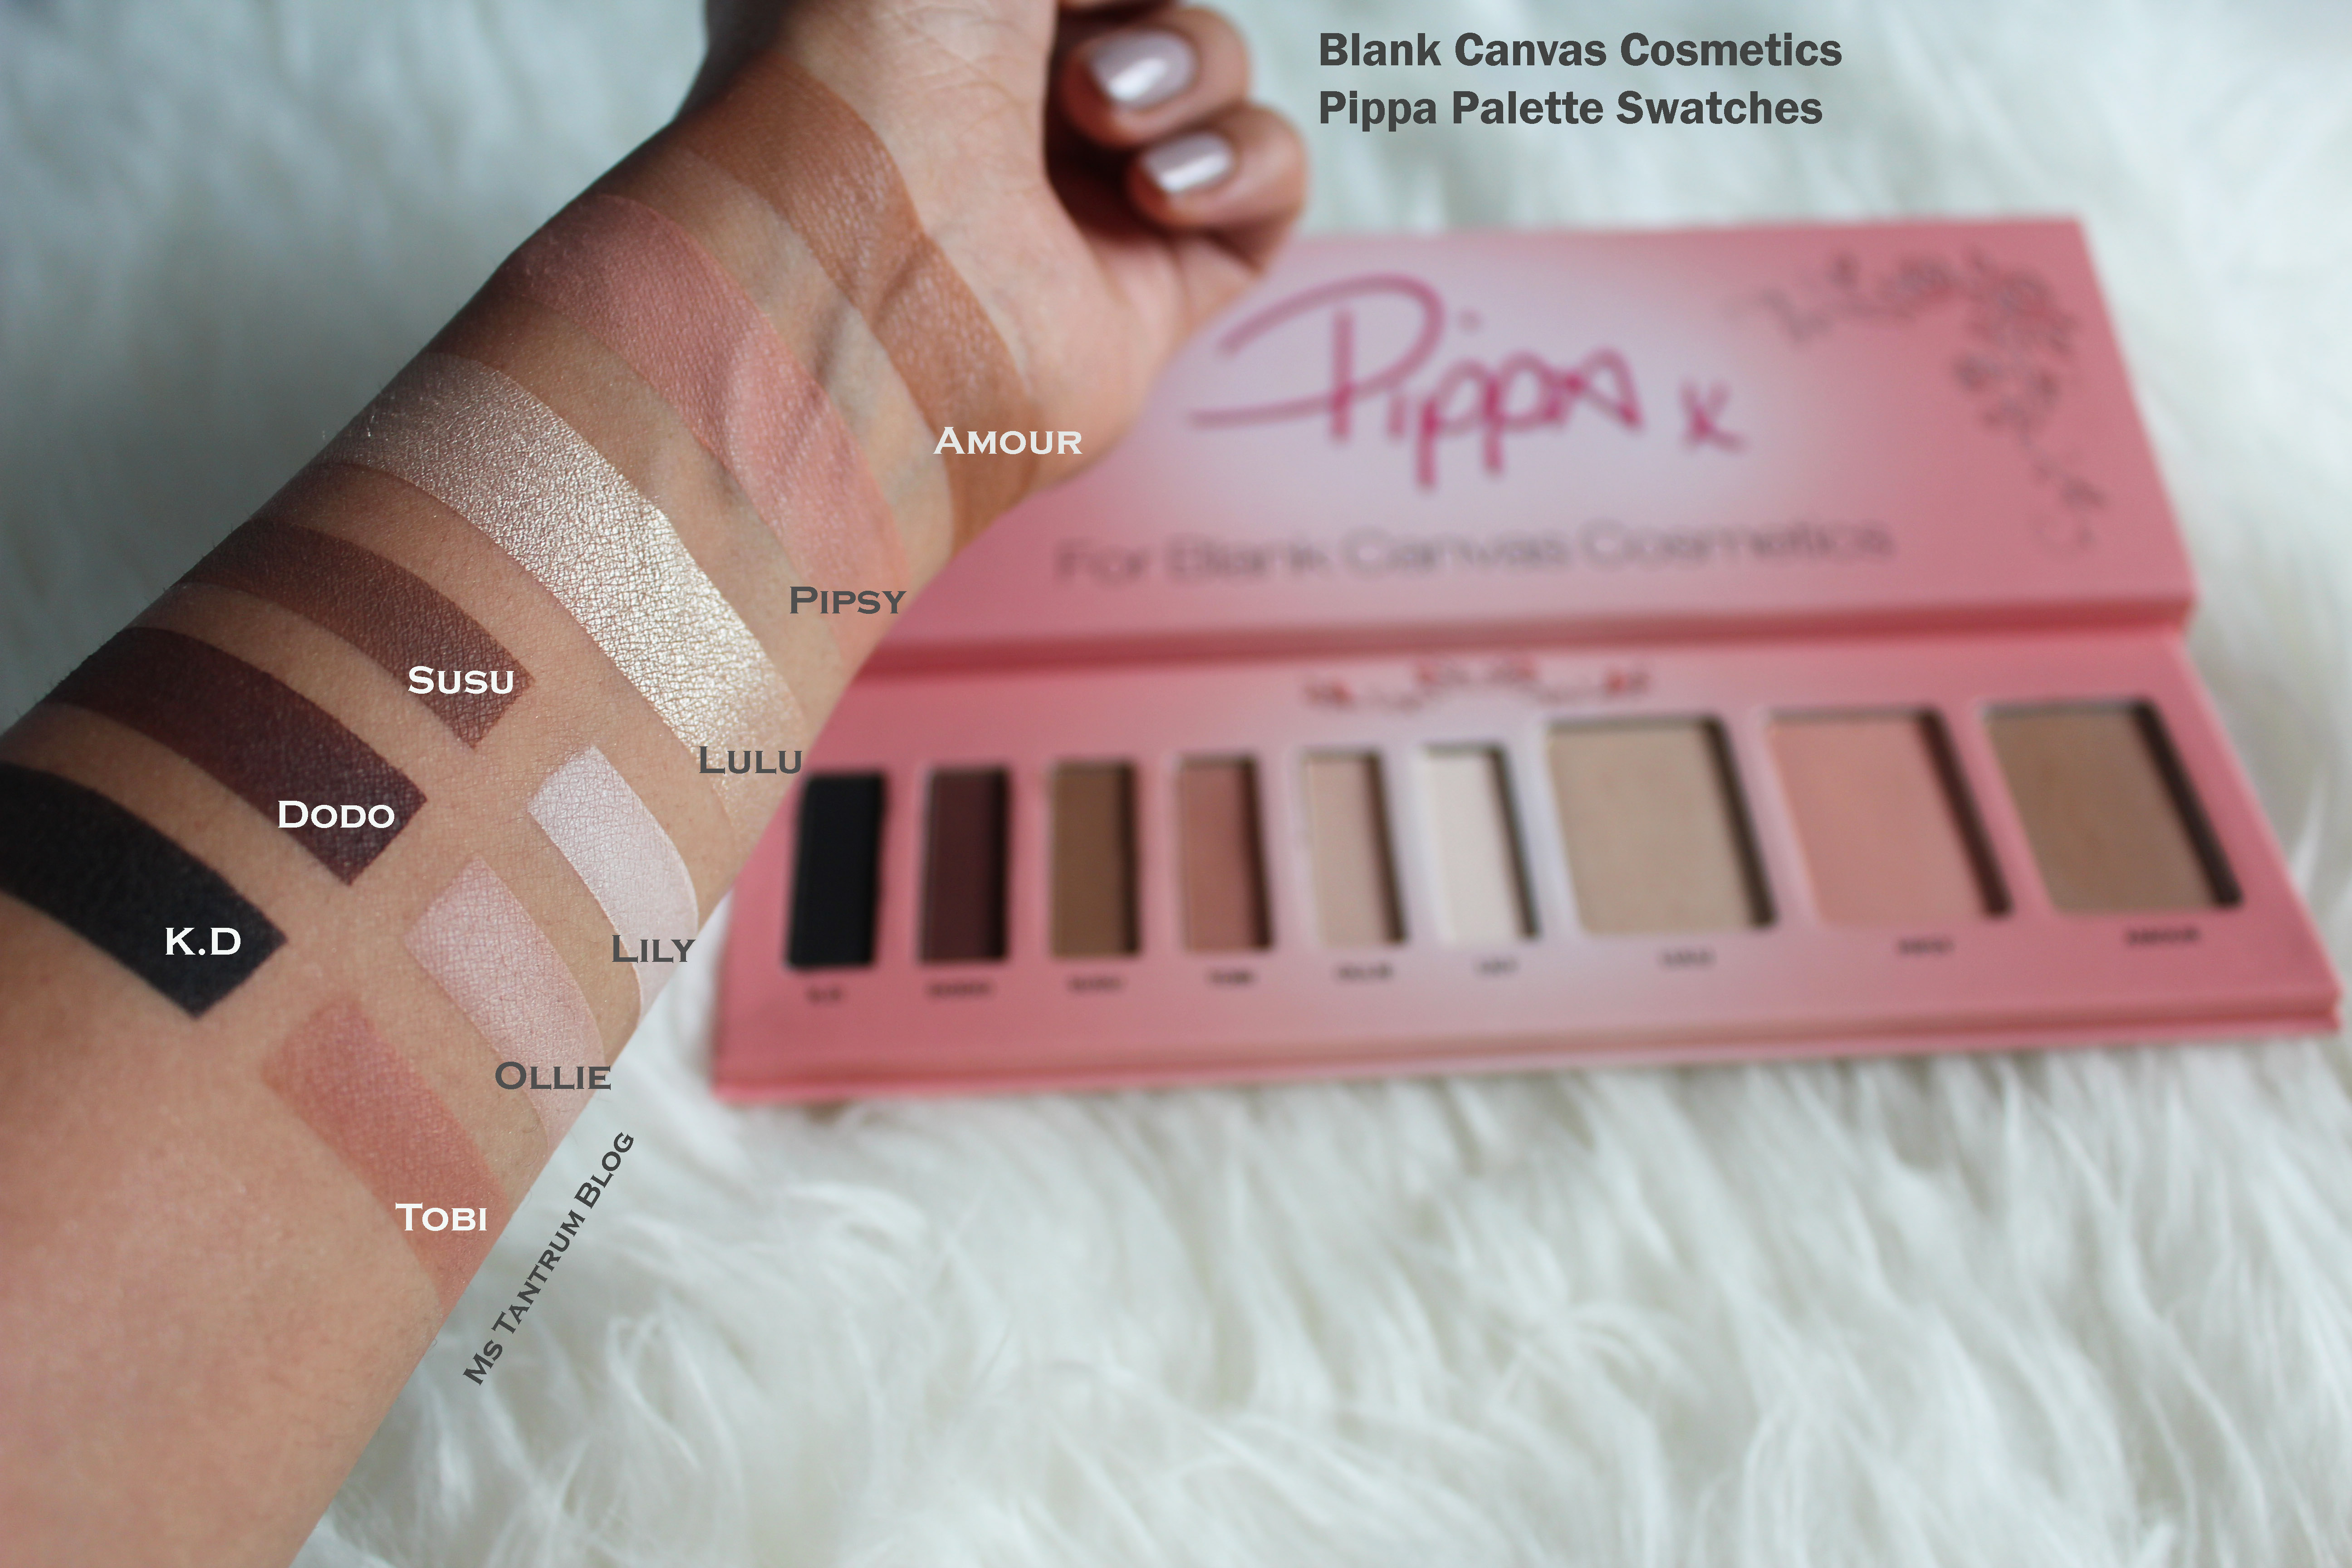 Blank Canvas Cosmetics Pippa Palette review & swatches 